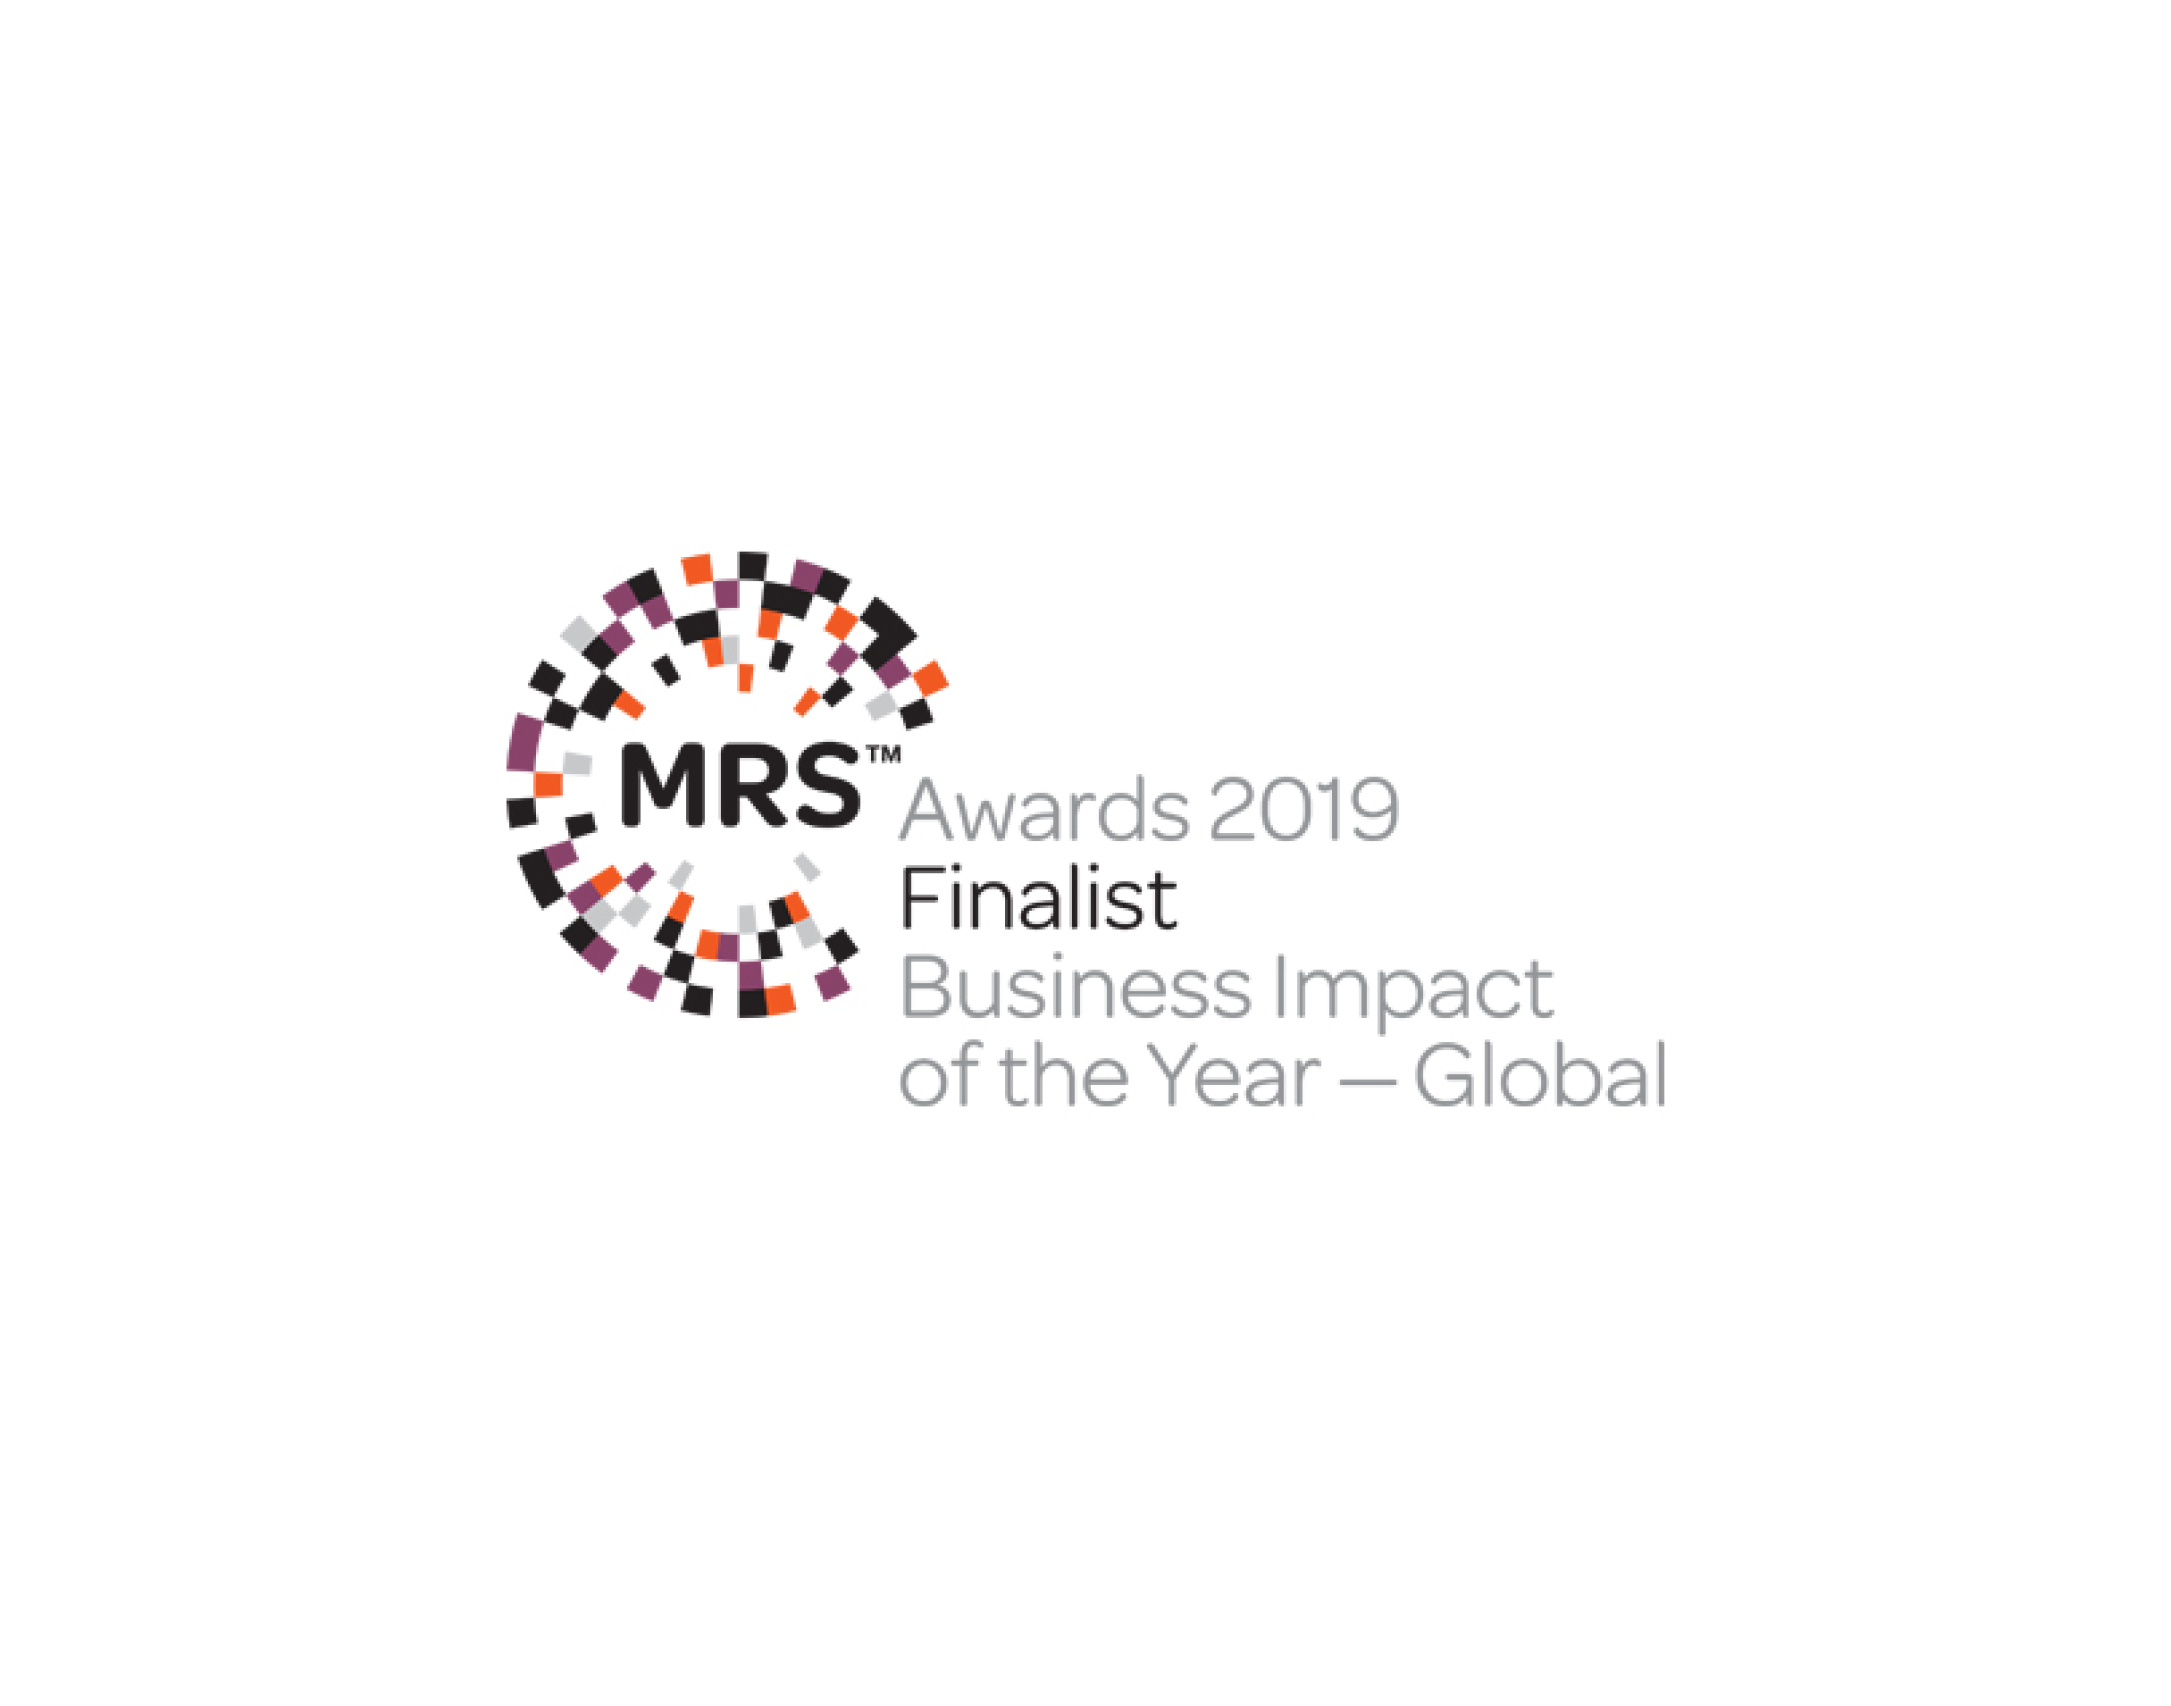 Formula 1 and Goodform shortlisted at the MRS awards 2019